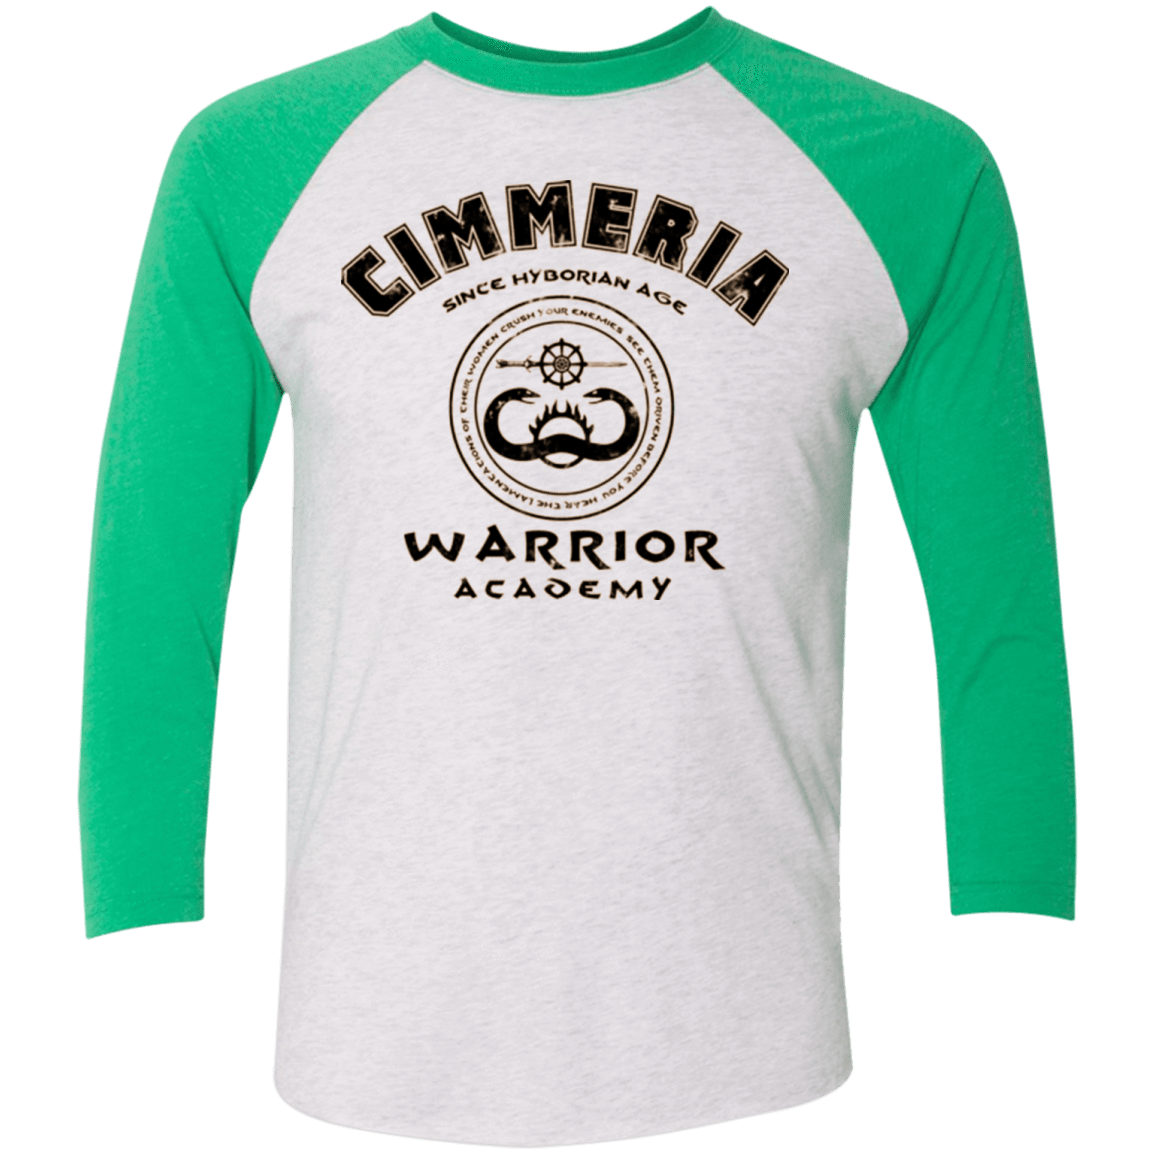 T-Shirts Heather White/Envy / X-Small Crimmeria Warrior academy Men's Triblend 3/4 Sleeve